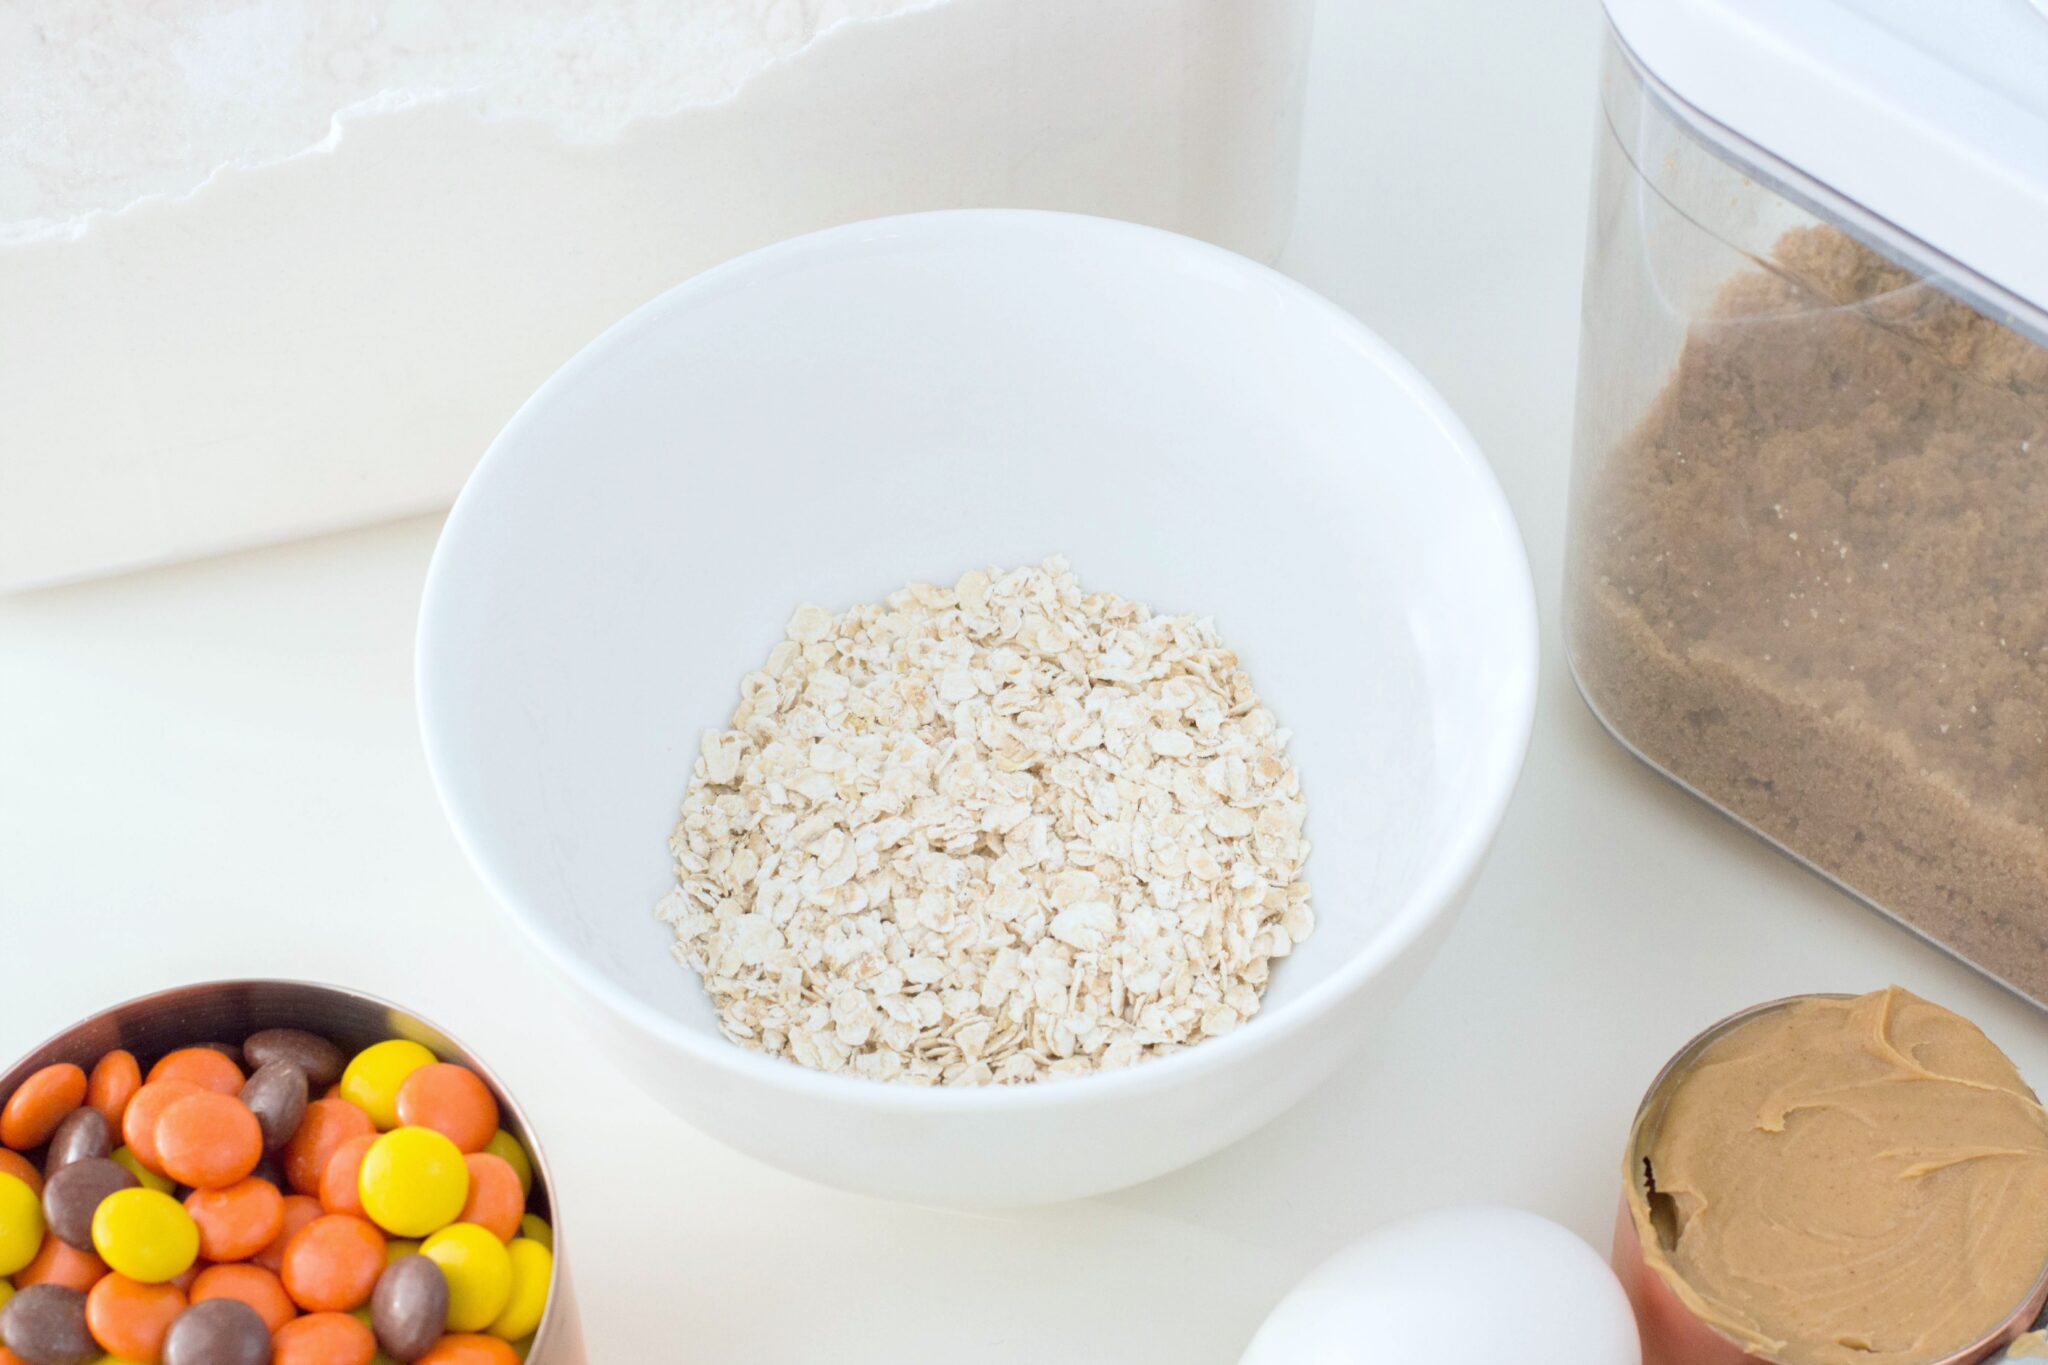 A bowl of oats, peanut butter, eggs, brown sugar, Reese's Pieces, and flour are shown.